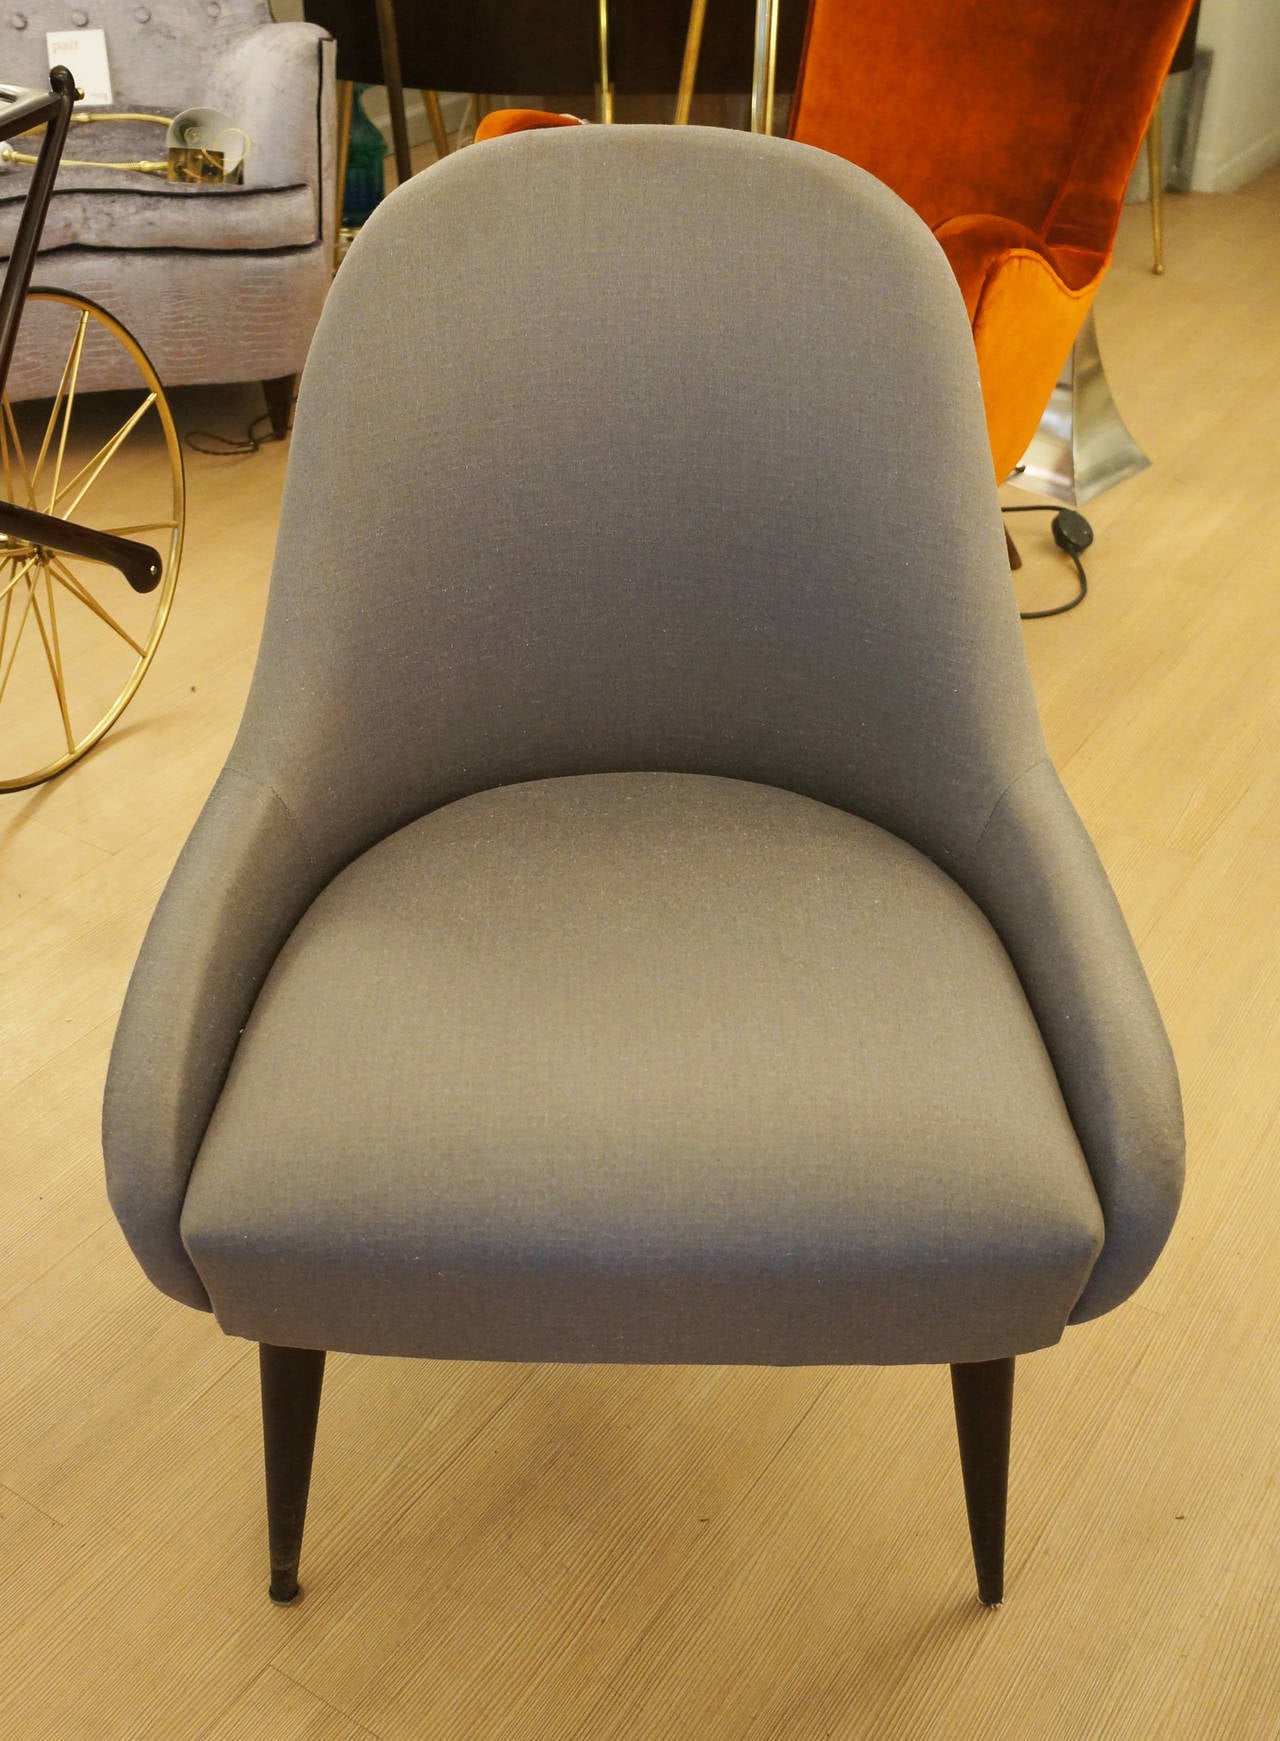 Pair of Italian 1950s sleeper chairs re-upholstered in a gray cotton. Legs stained ebony.